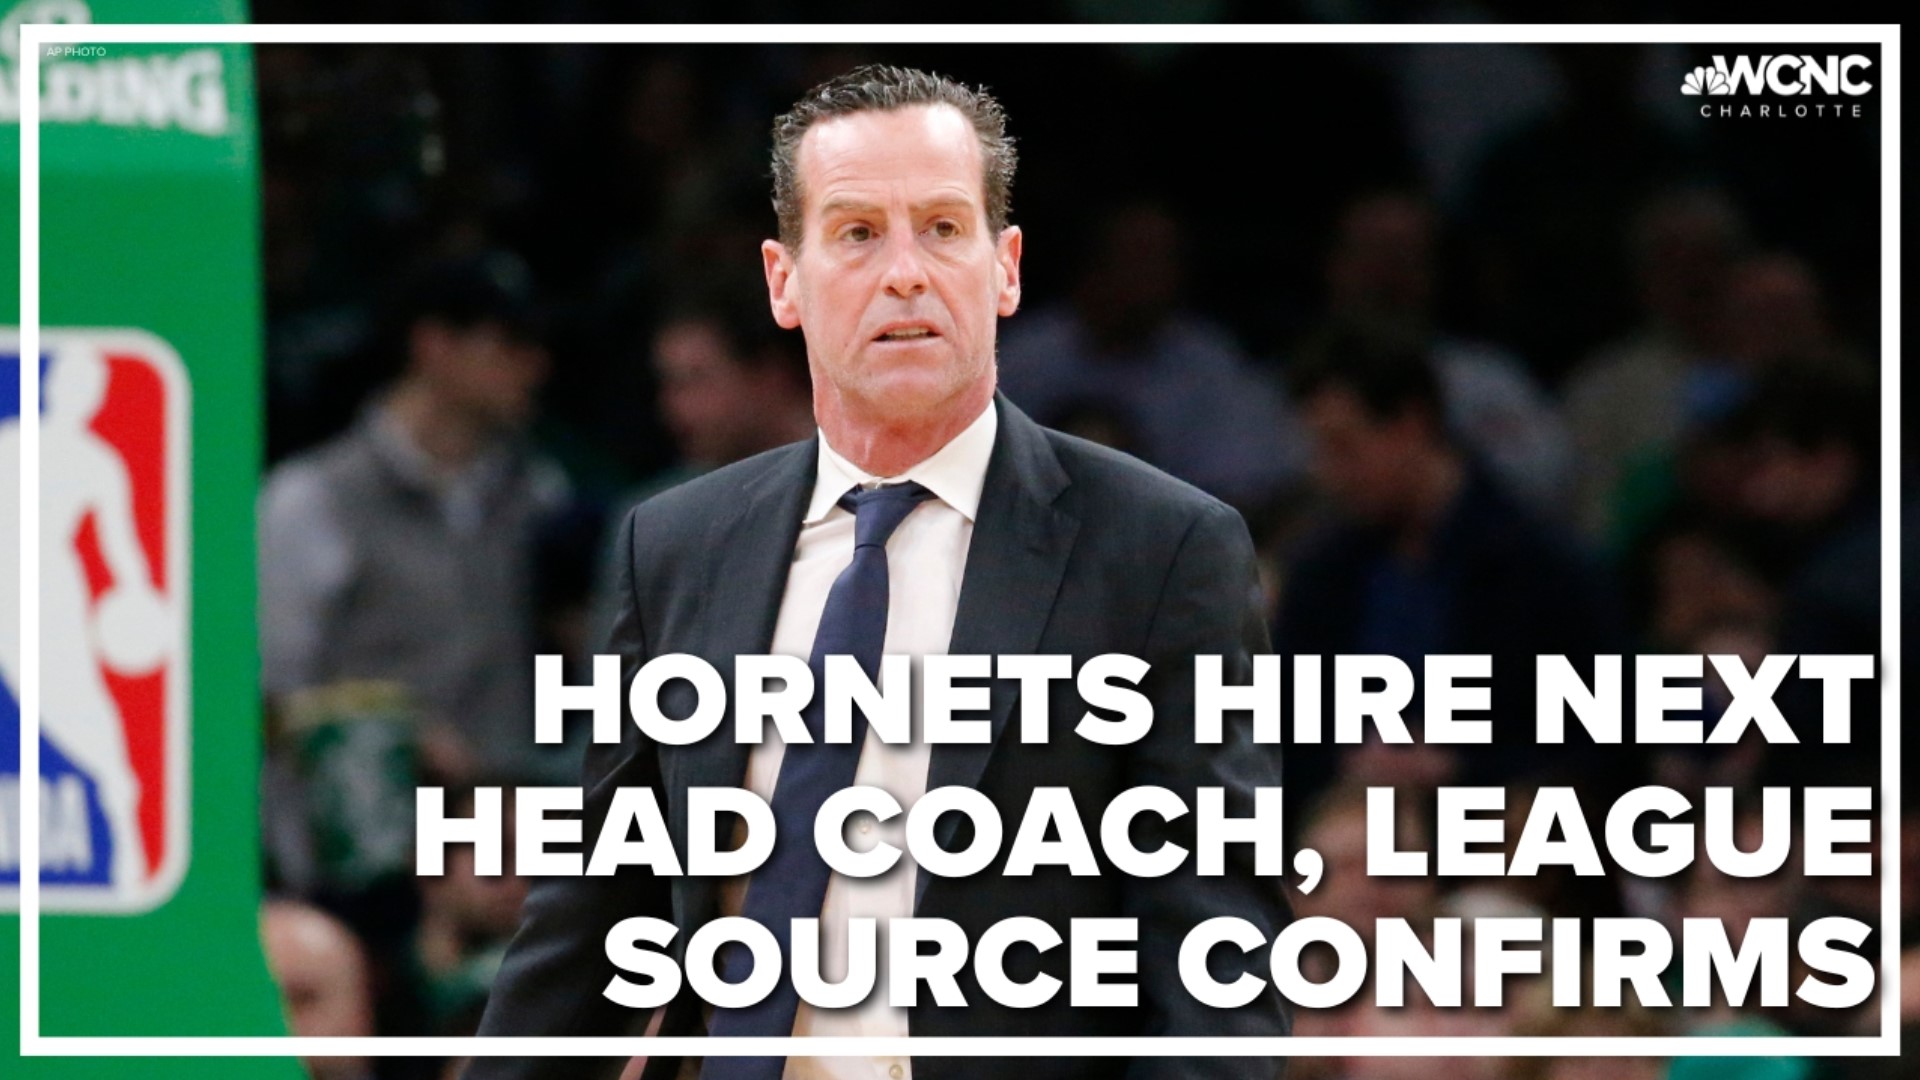 The Charlotte Hornets have agreed to hire Kenny Atkinson as their next head coach, a league source confirmed to WCNC Charlotte.